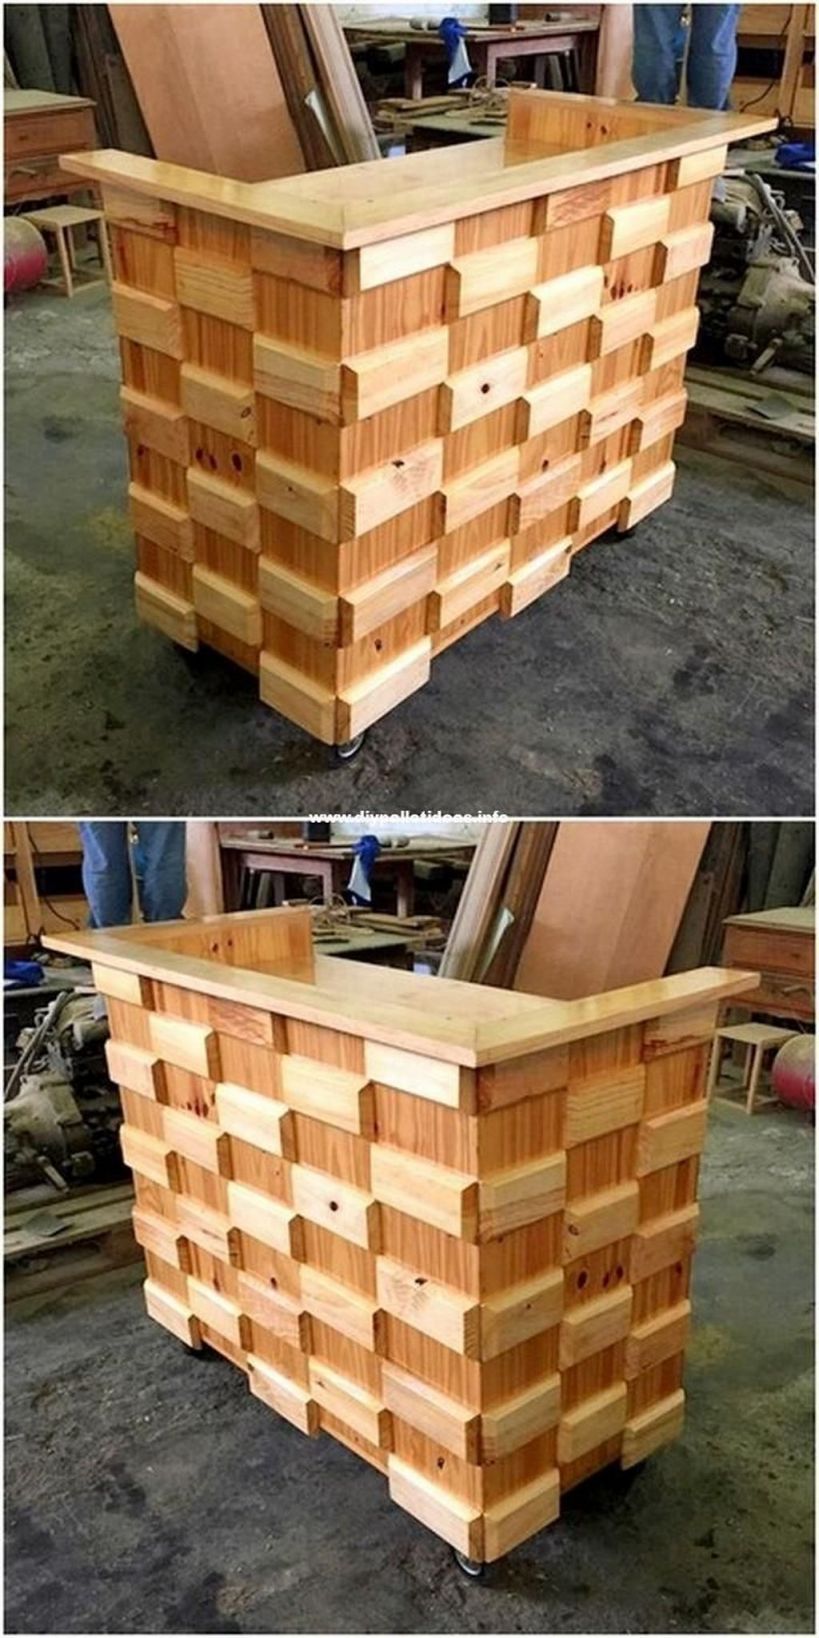 Awesome creative ideas with wooden pallets 